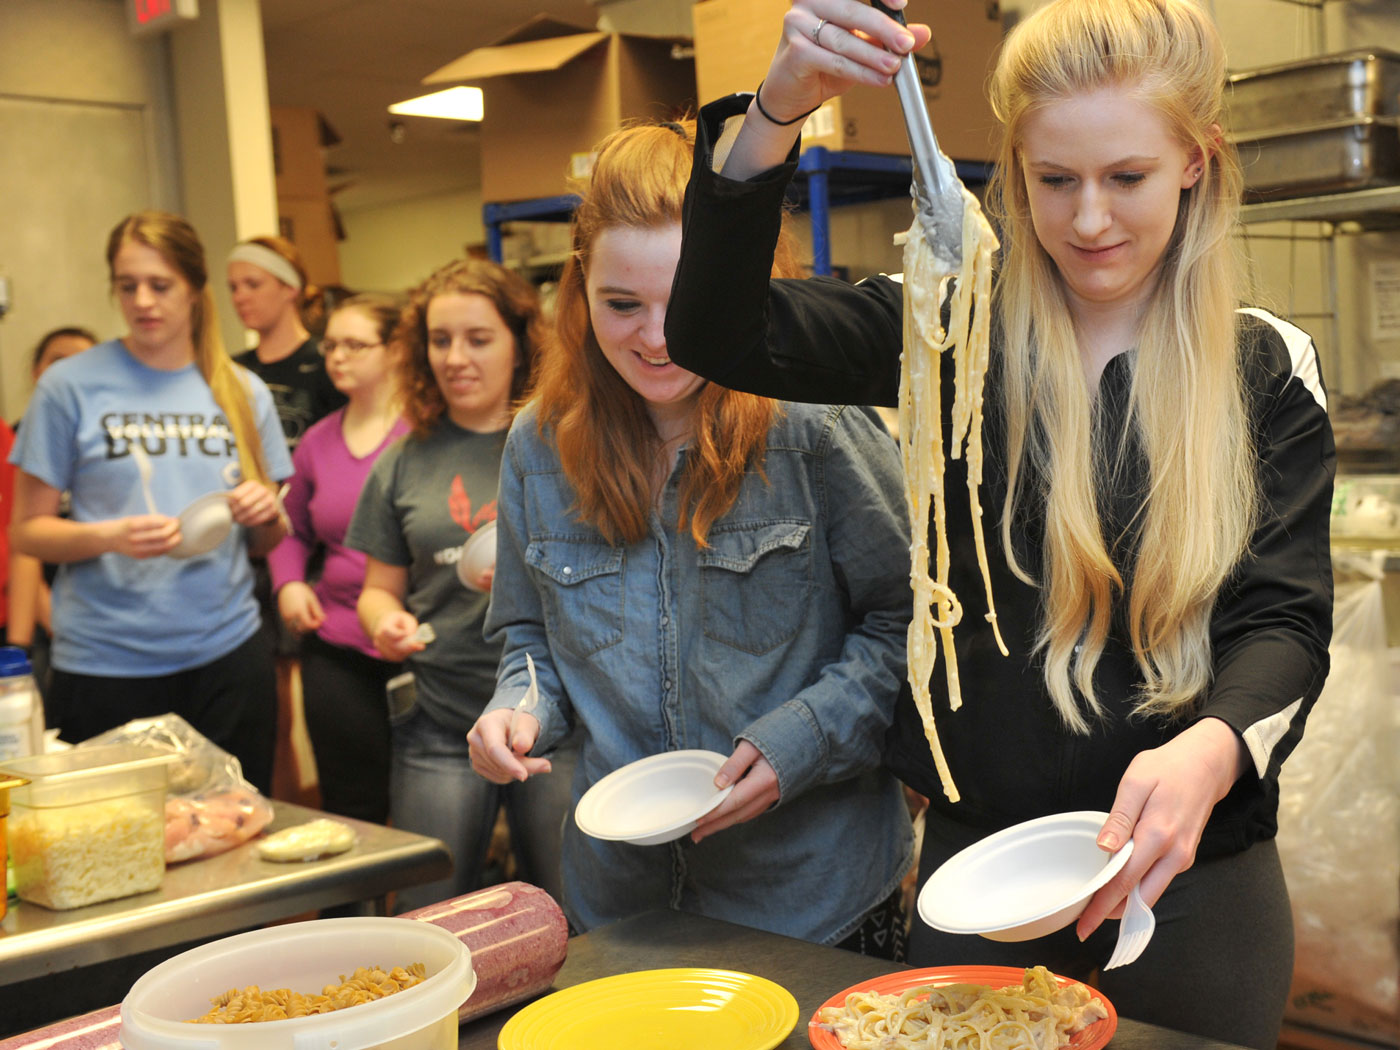 Richard Phillips, director of dining services, recently taught a cooking class that sparked a series to continue next year.